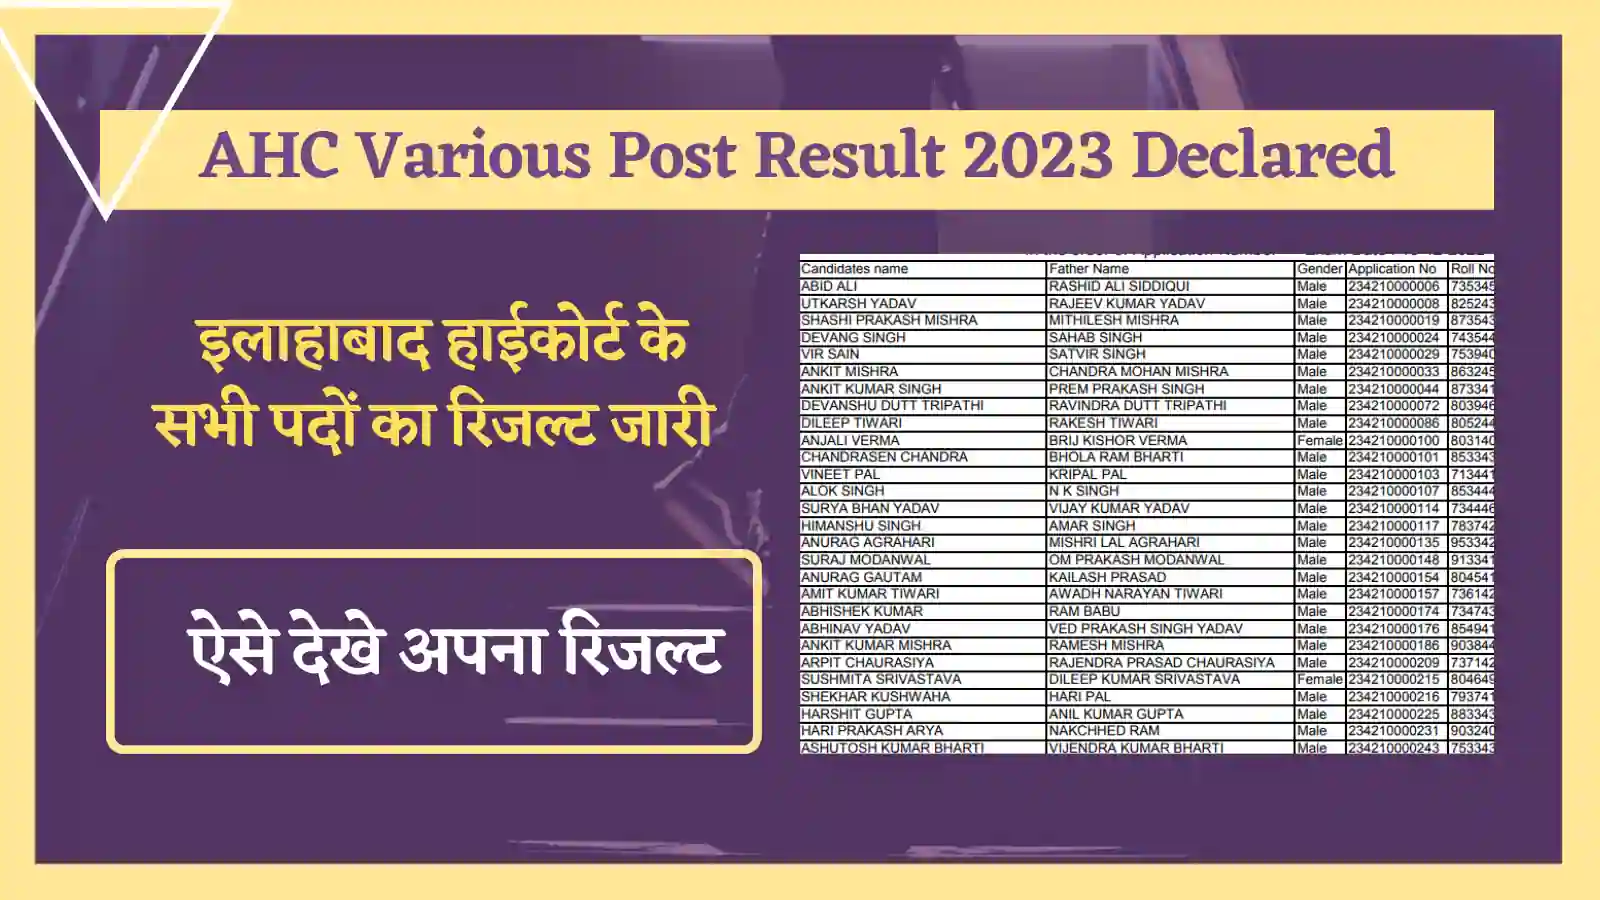 Allahabad High Court Various Post Result 2023 Declared